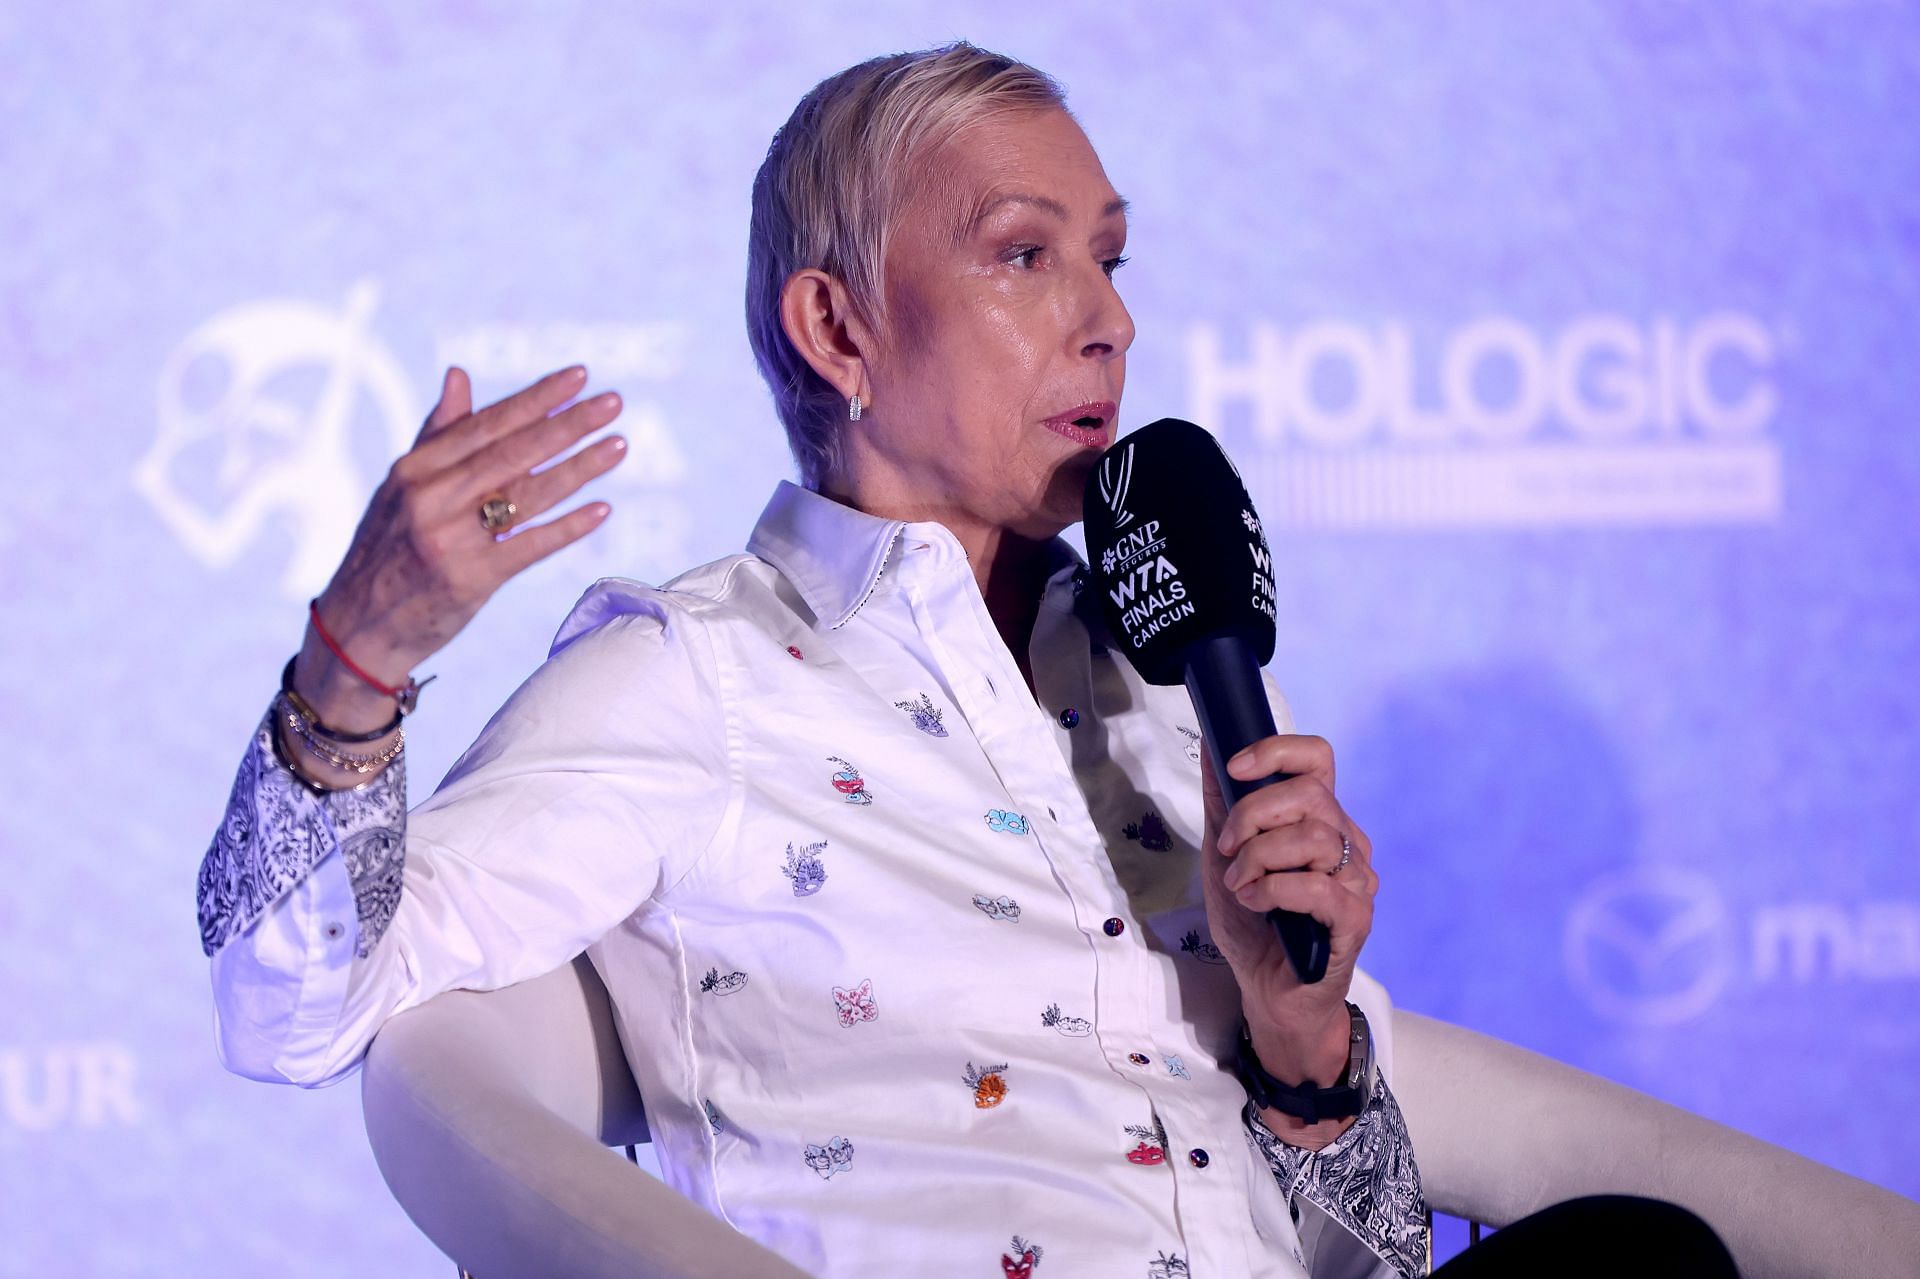 Martina Navratilova speaks during an event at the 2023 WTA Finals in Cancun, Mexico.